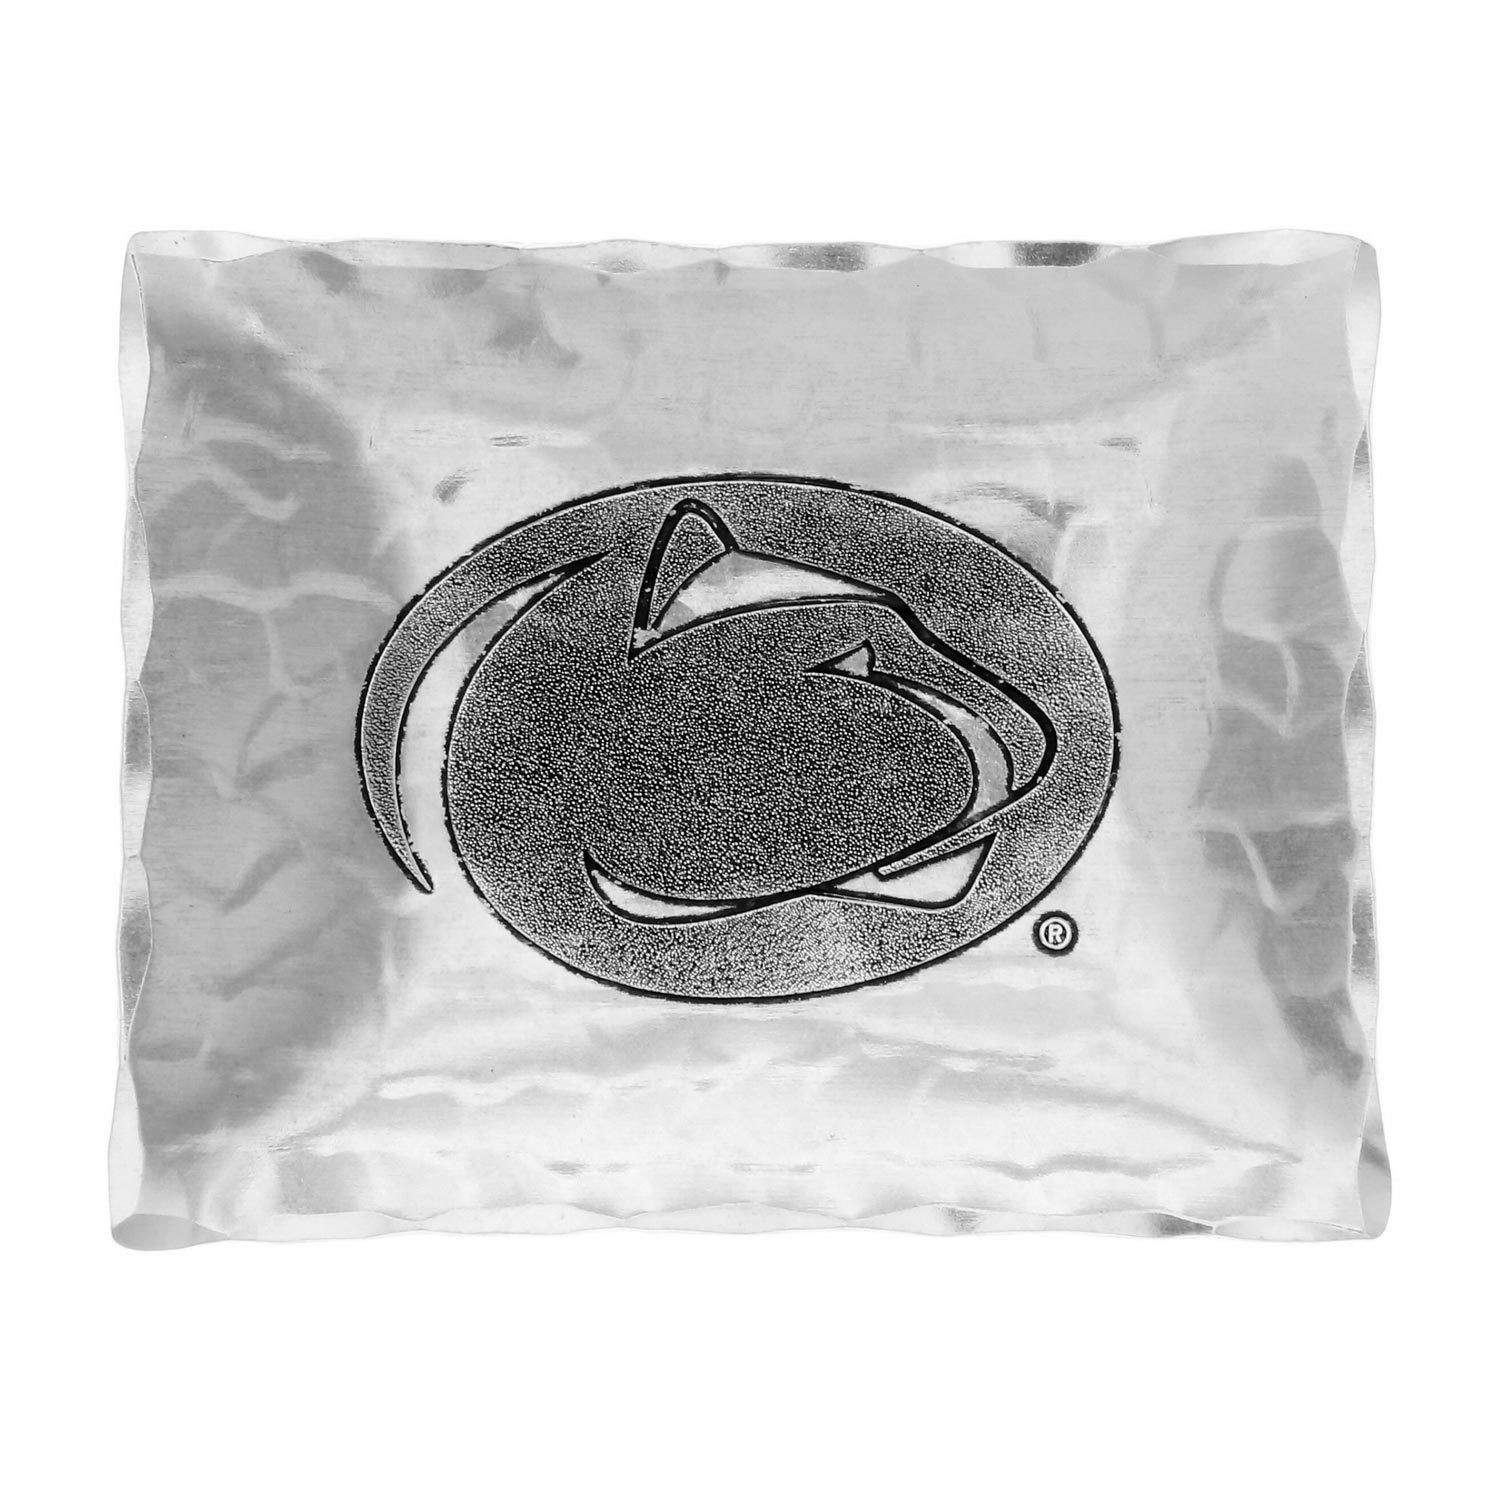 Penn State Graduation Gift Ideas
 Penn State Wendell August Forge tray